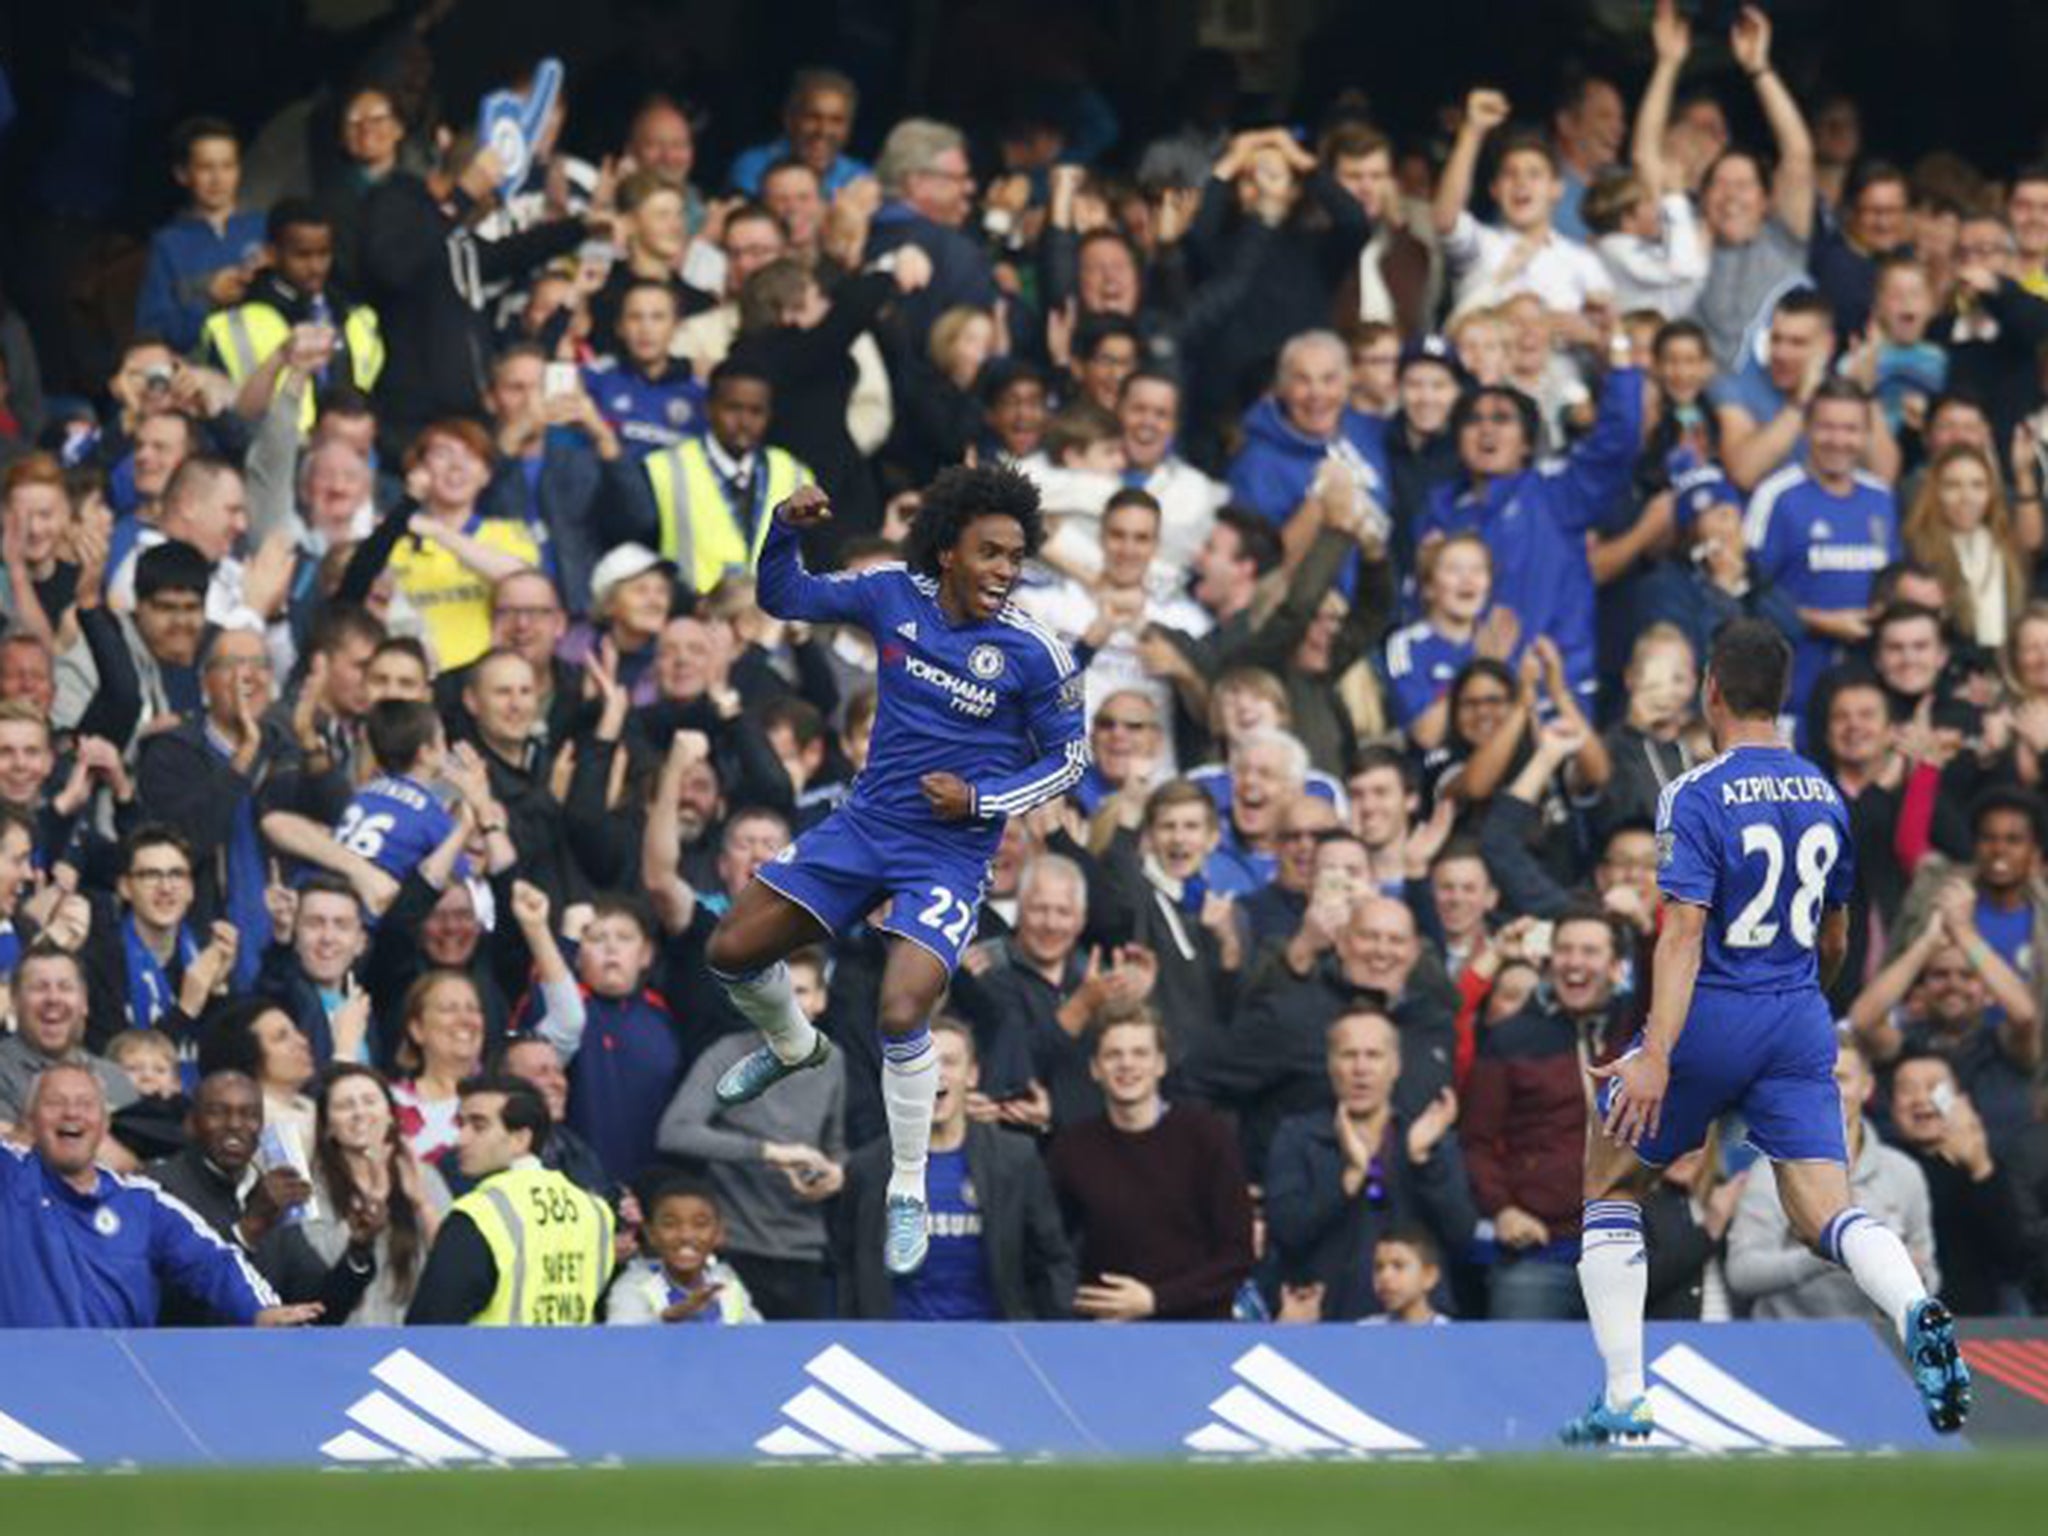 It was all going well for Chelsea when Willian opened the scoring